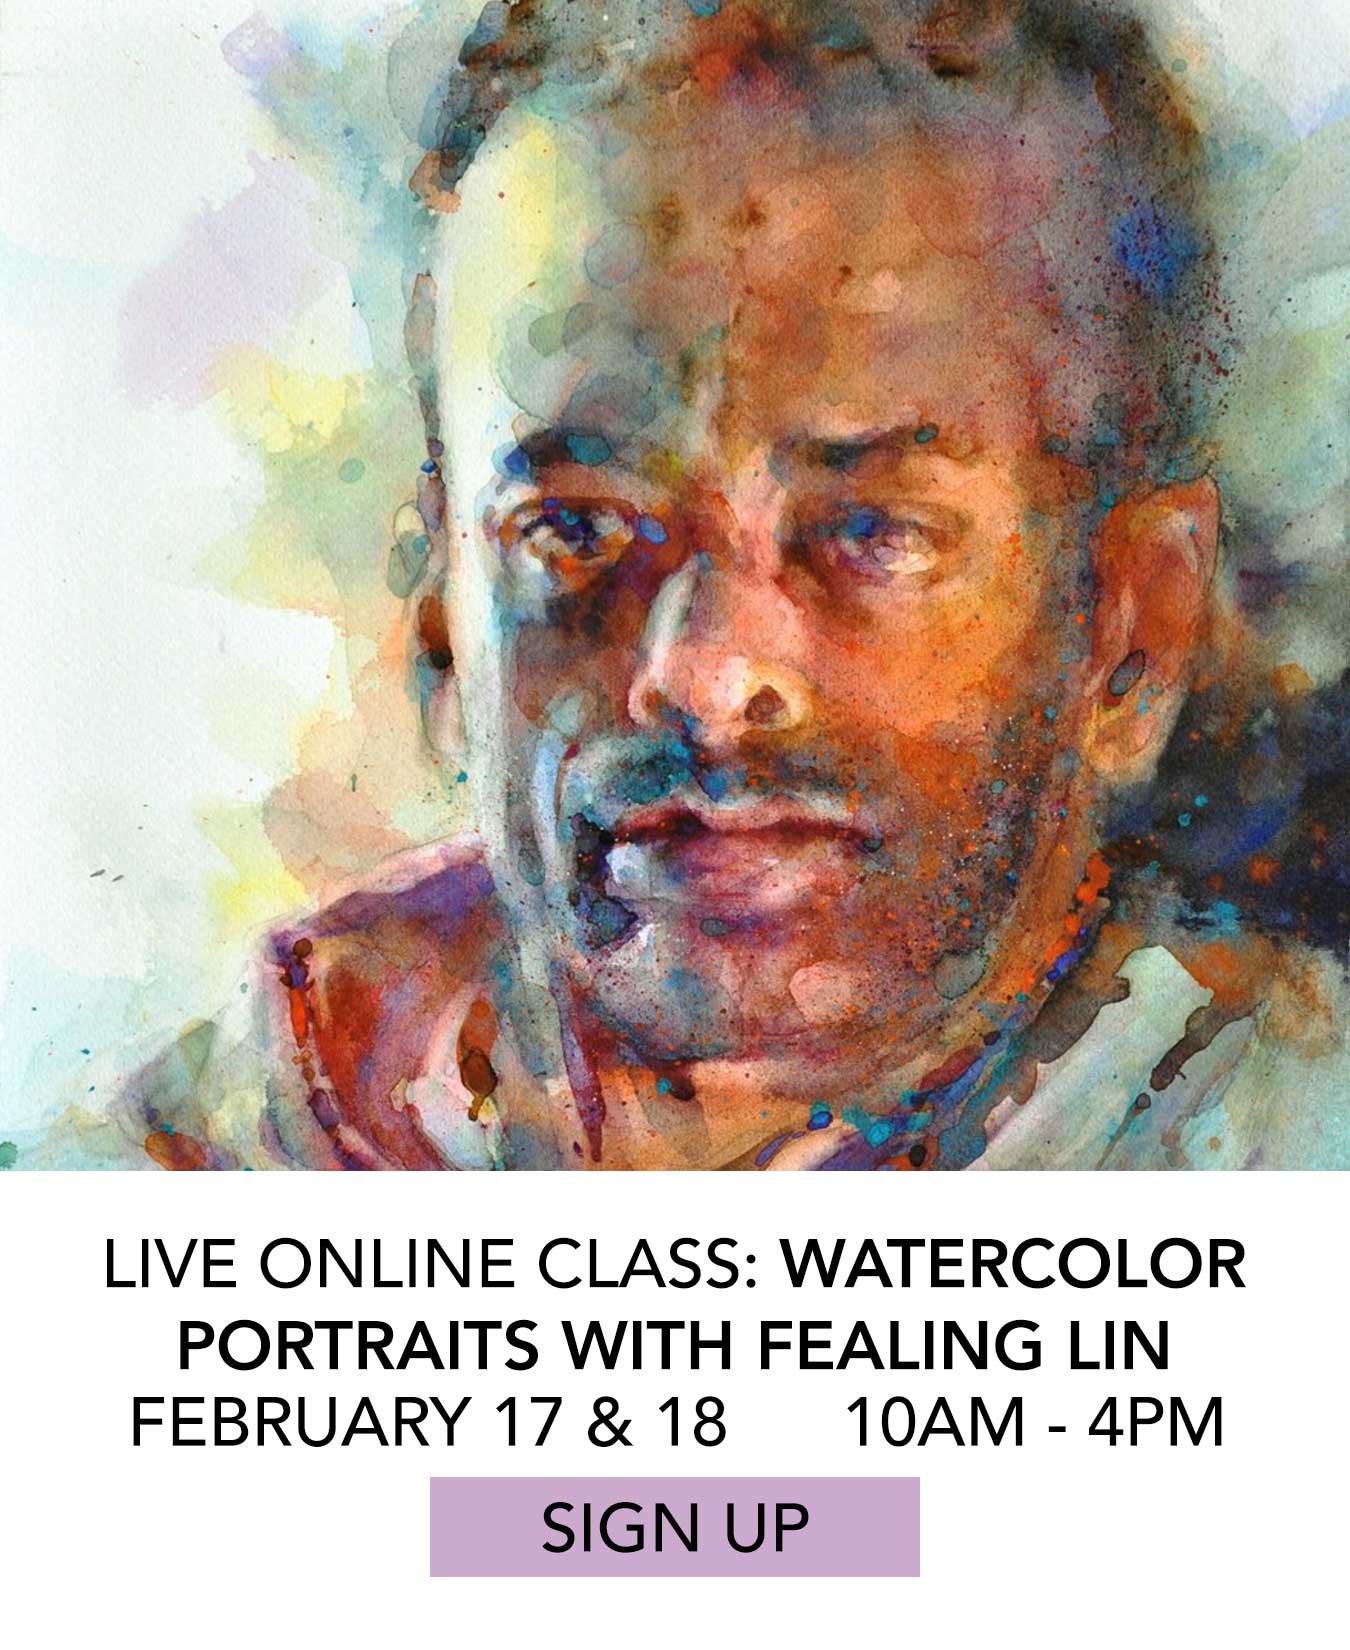 Live Online Class: Watercolor Portraits with Fealing Lin. February 17 & 18 from 10am to 4pm. Click to Sign Up.